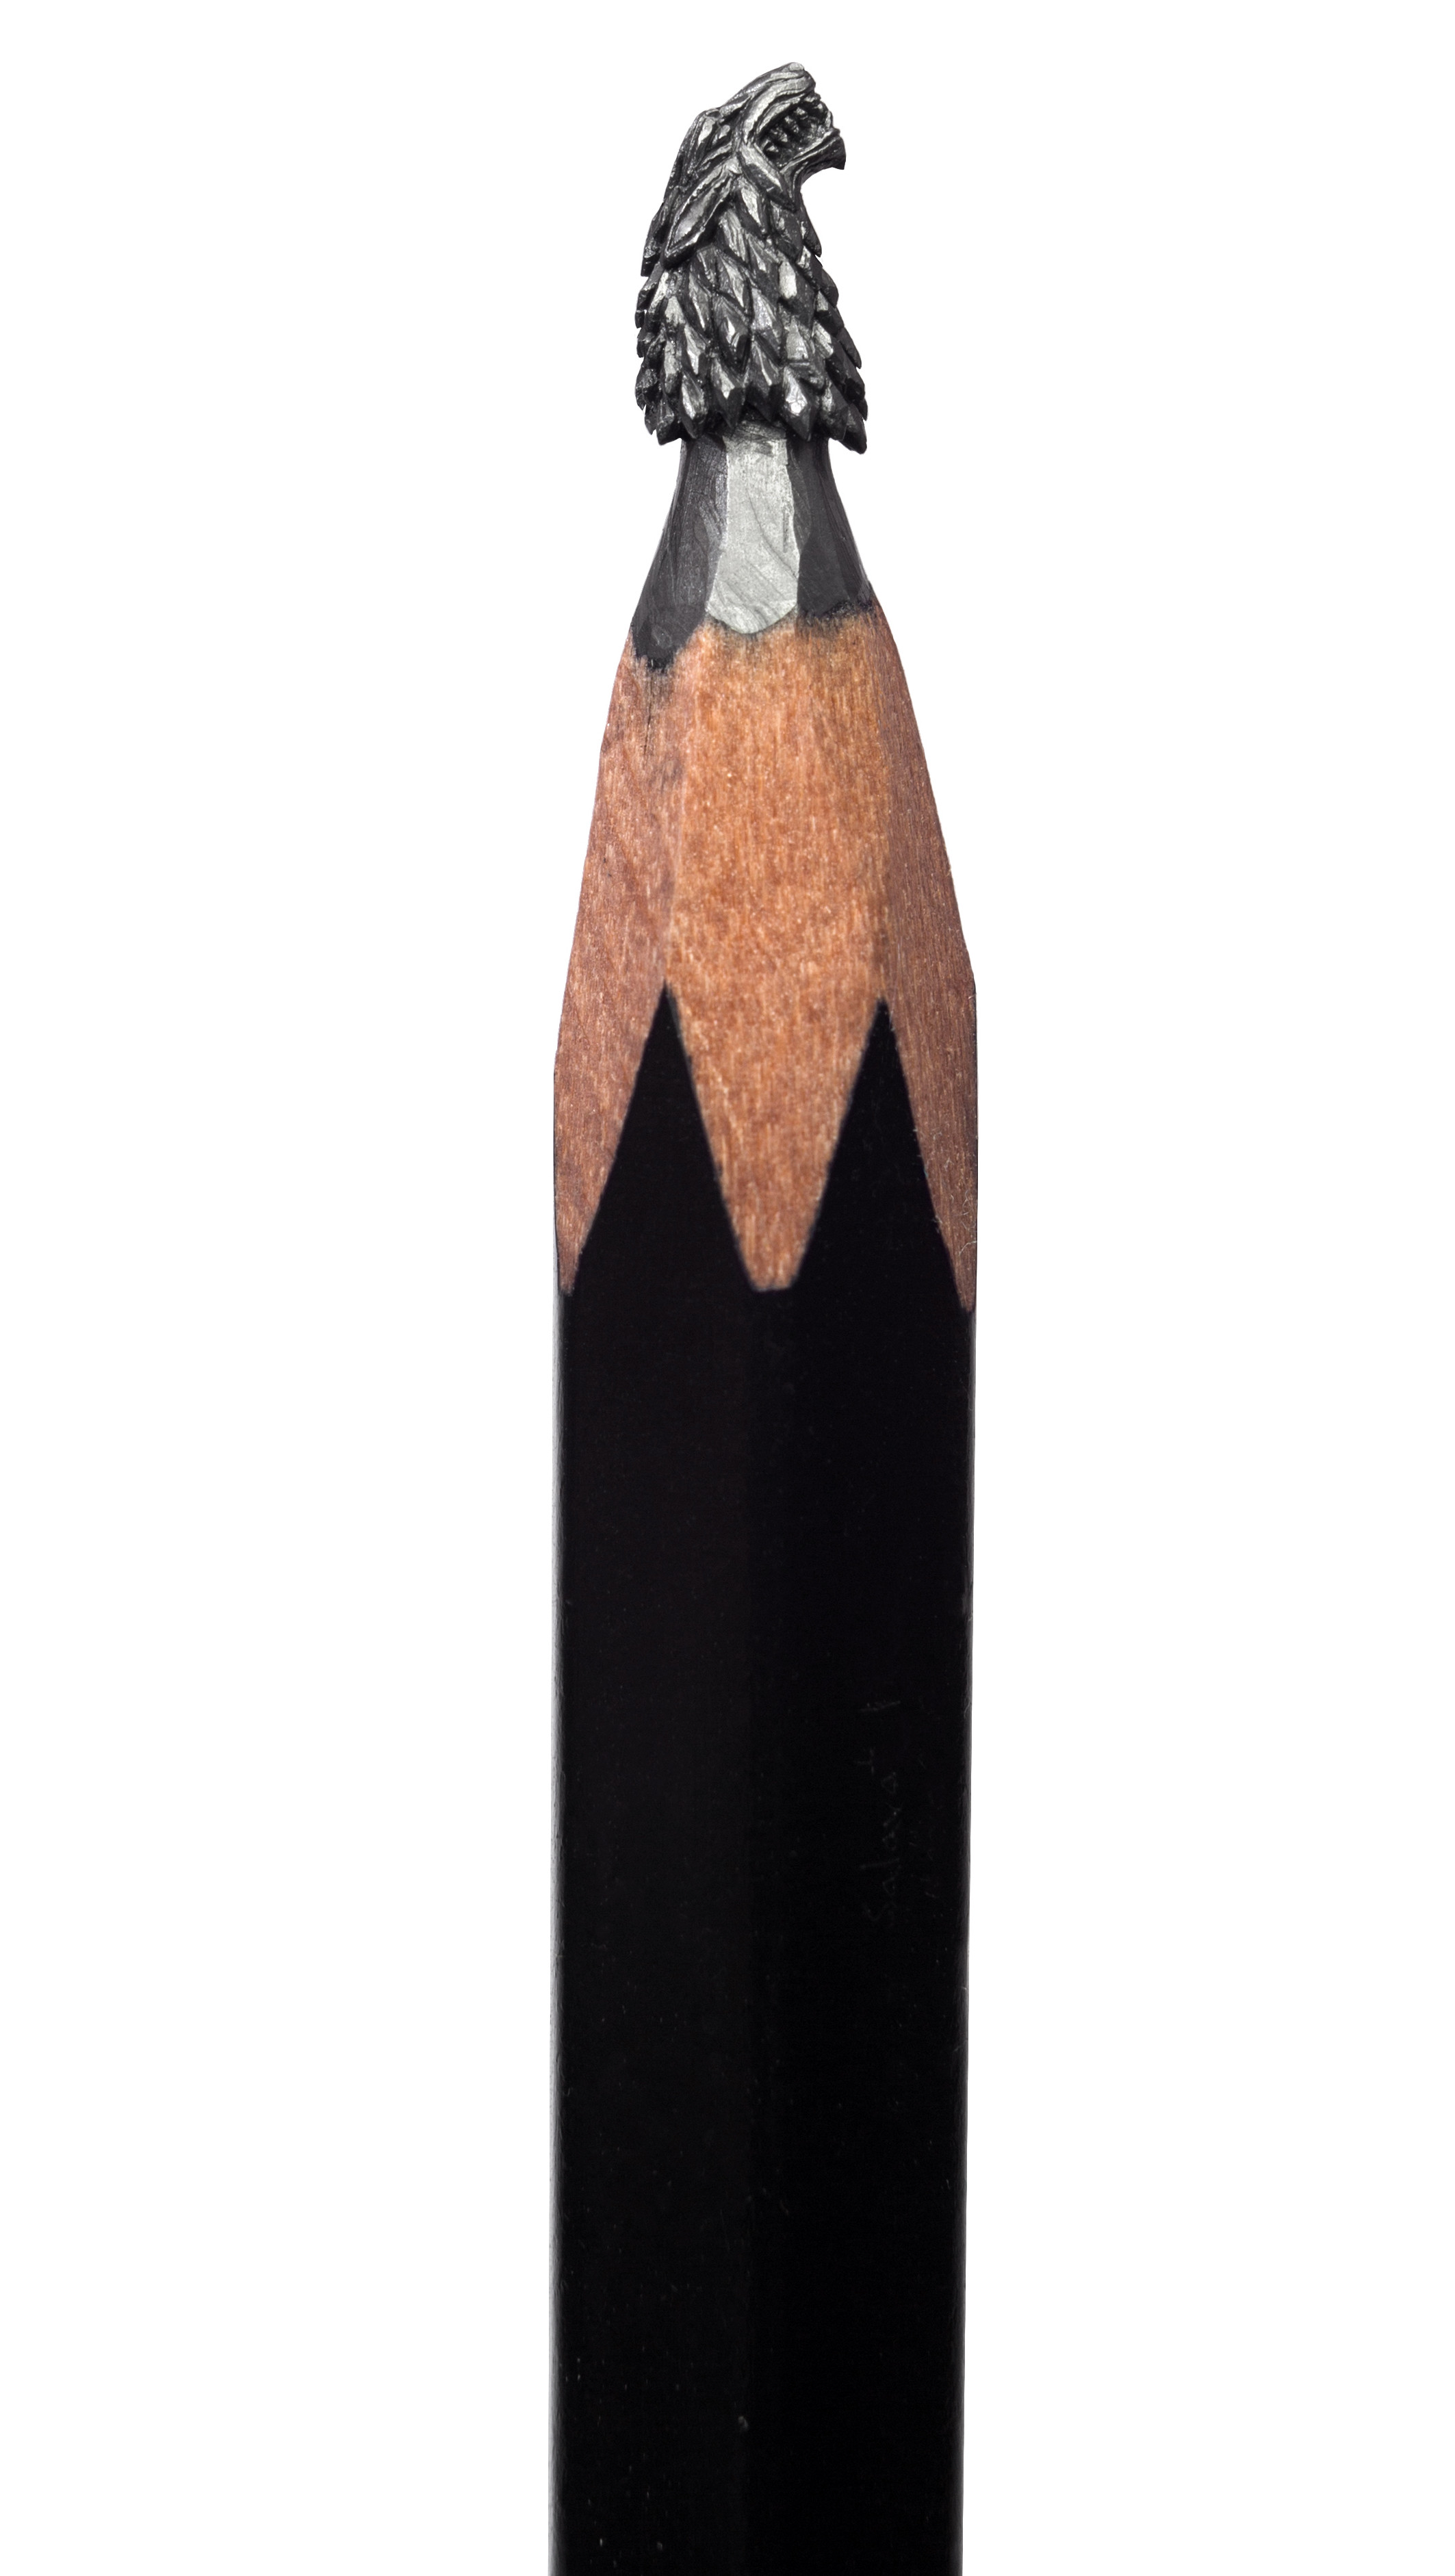 GAME OF THRONES Pencil Microscupture Exhibition - Stark Sigil